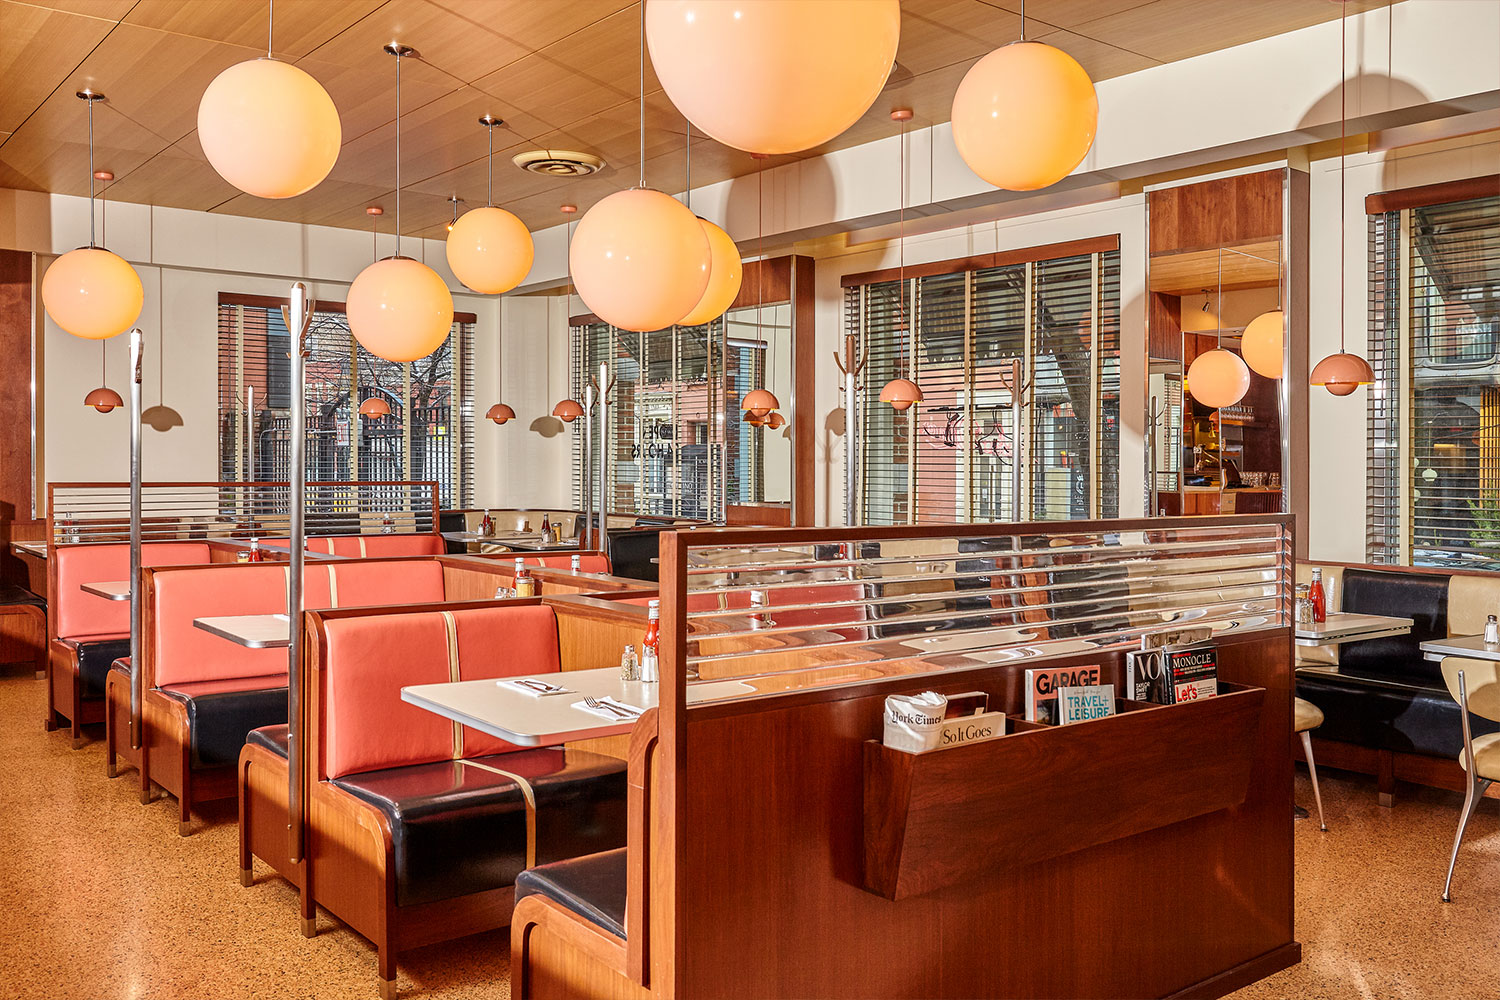 the interior of the soho diner. Red booths with dark wood line the space and there are large spherical lights hanging from the ceiling